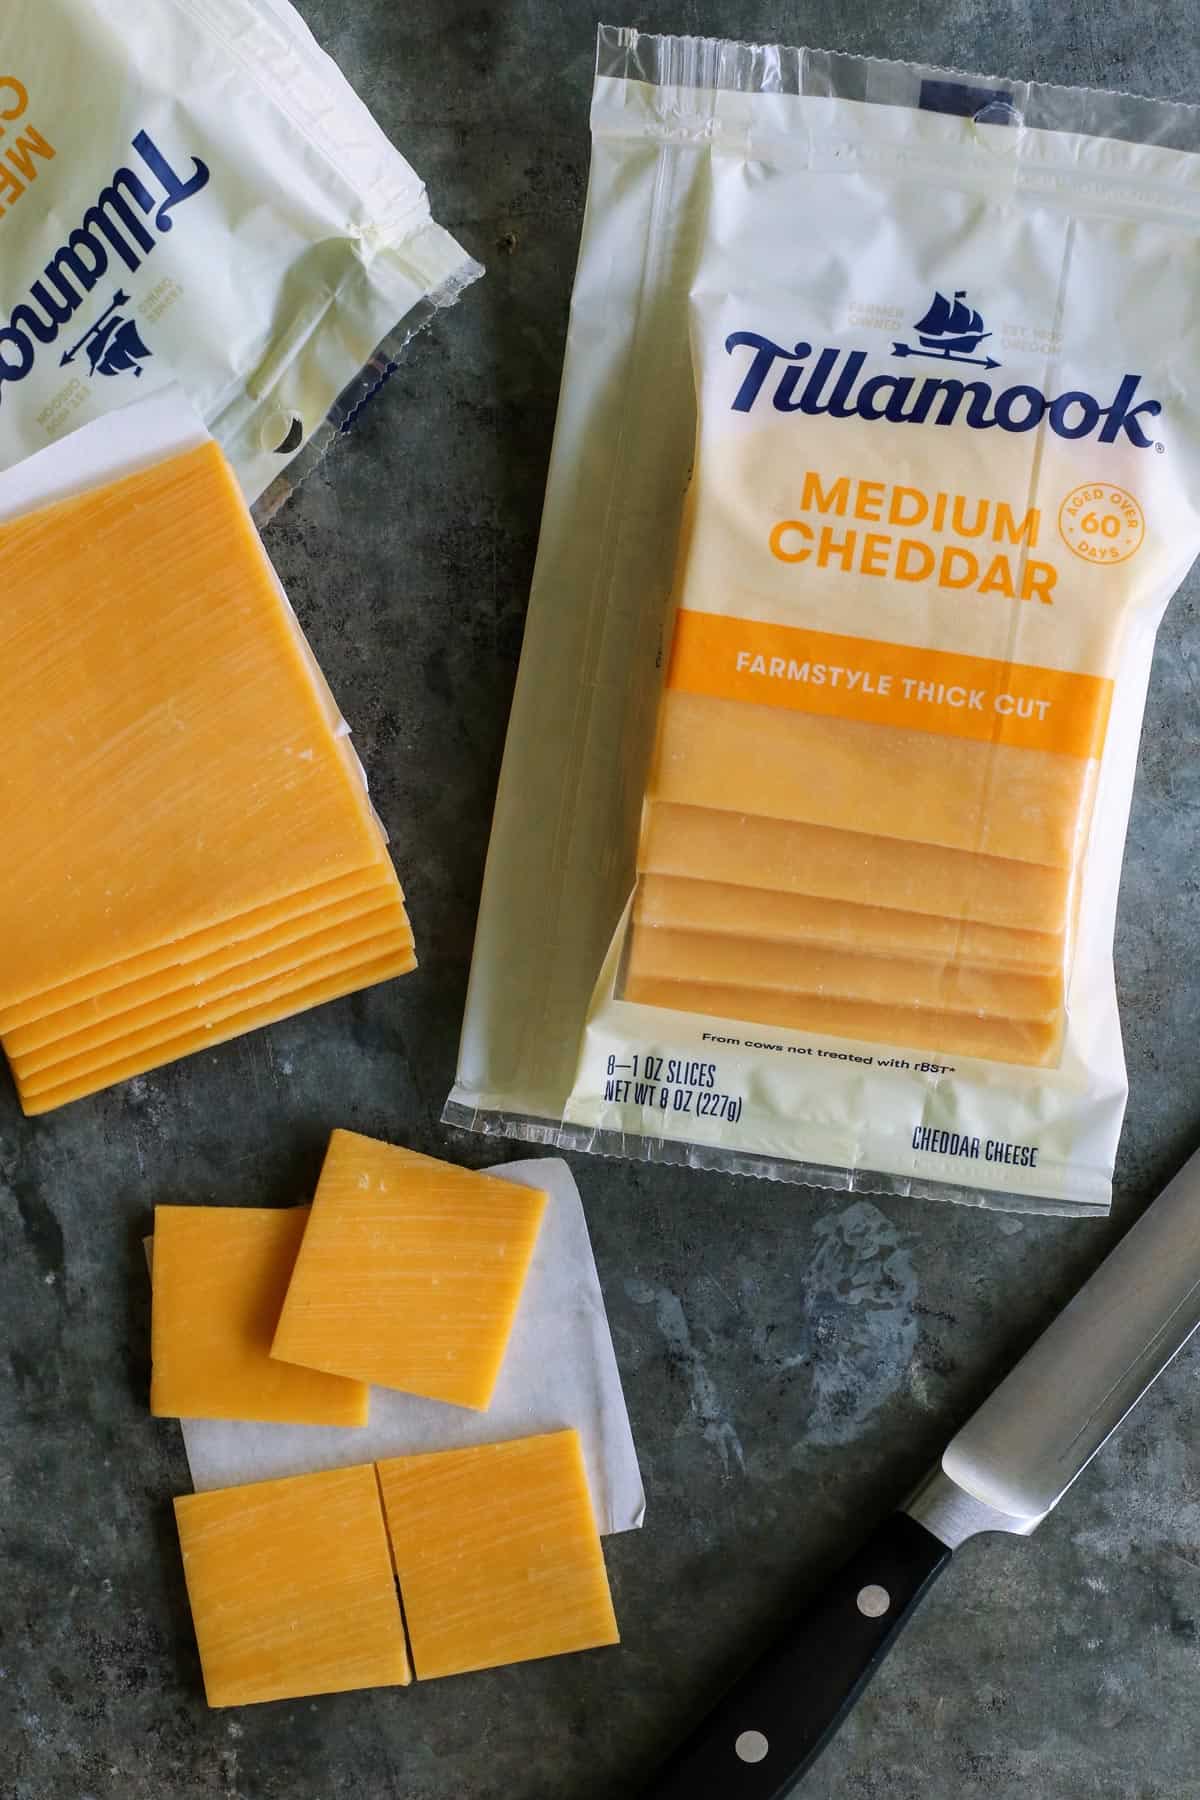 packages of Tillamook farmstyle thick cut medium cheddar slices